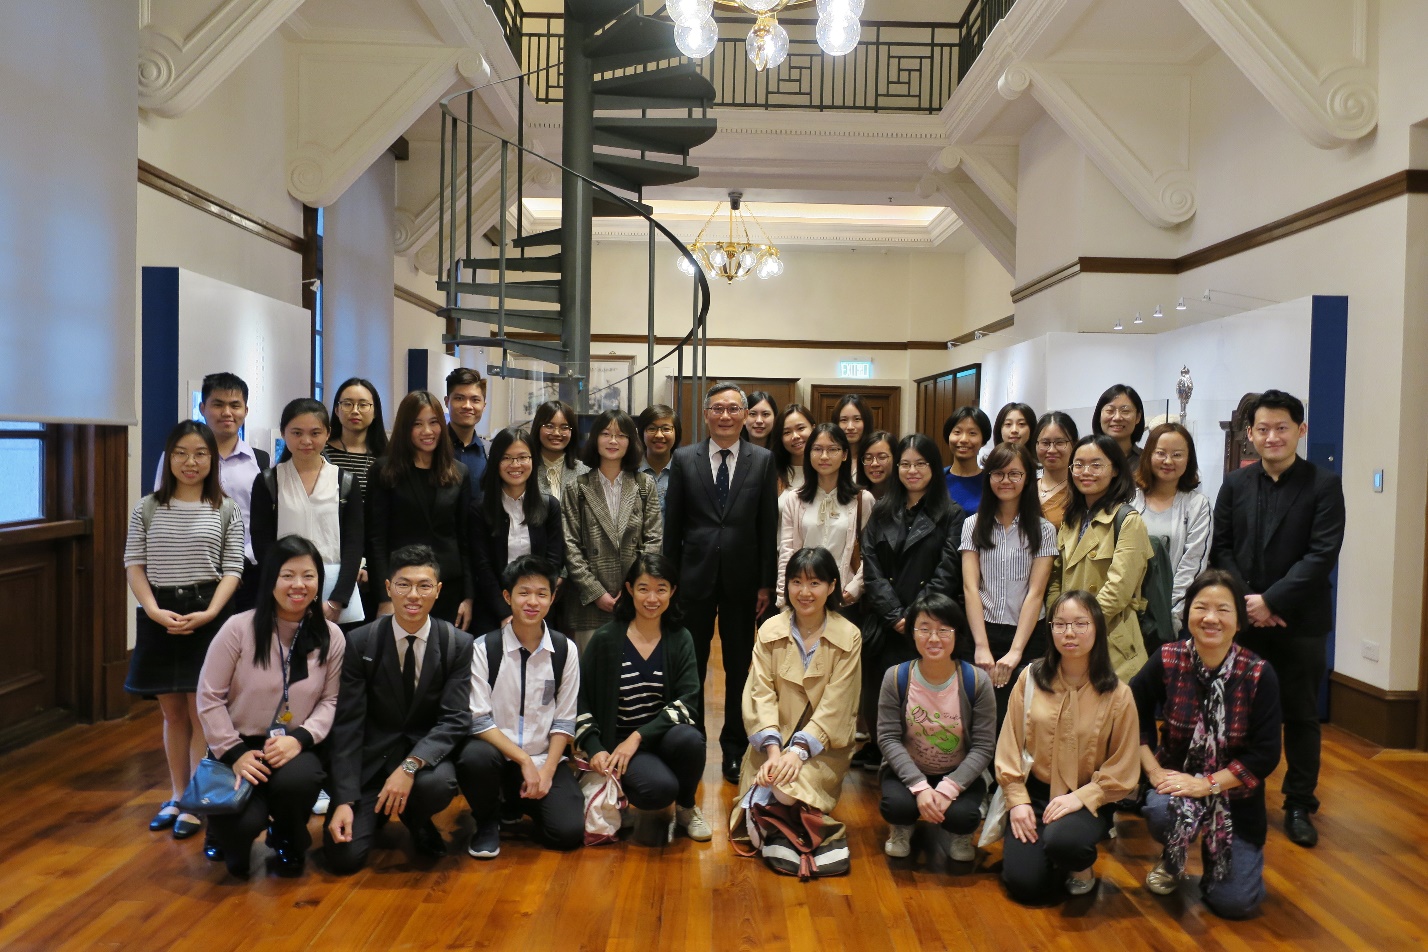 University students joining the school guided visit to the Court of Final Appeal take photo with the Hon Mr Justice CHEUNG, Permanent Judge of the Court of Final Appeal